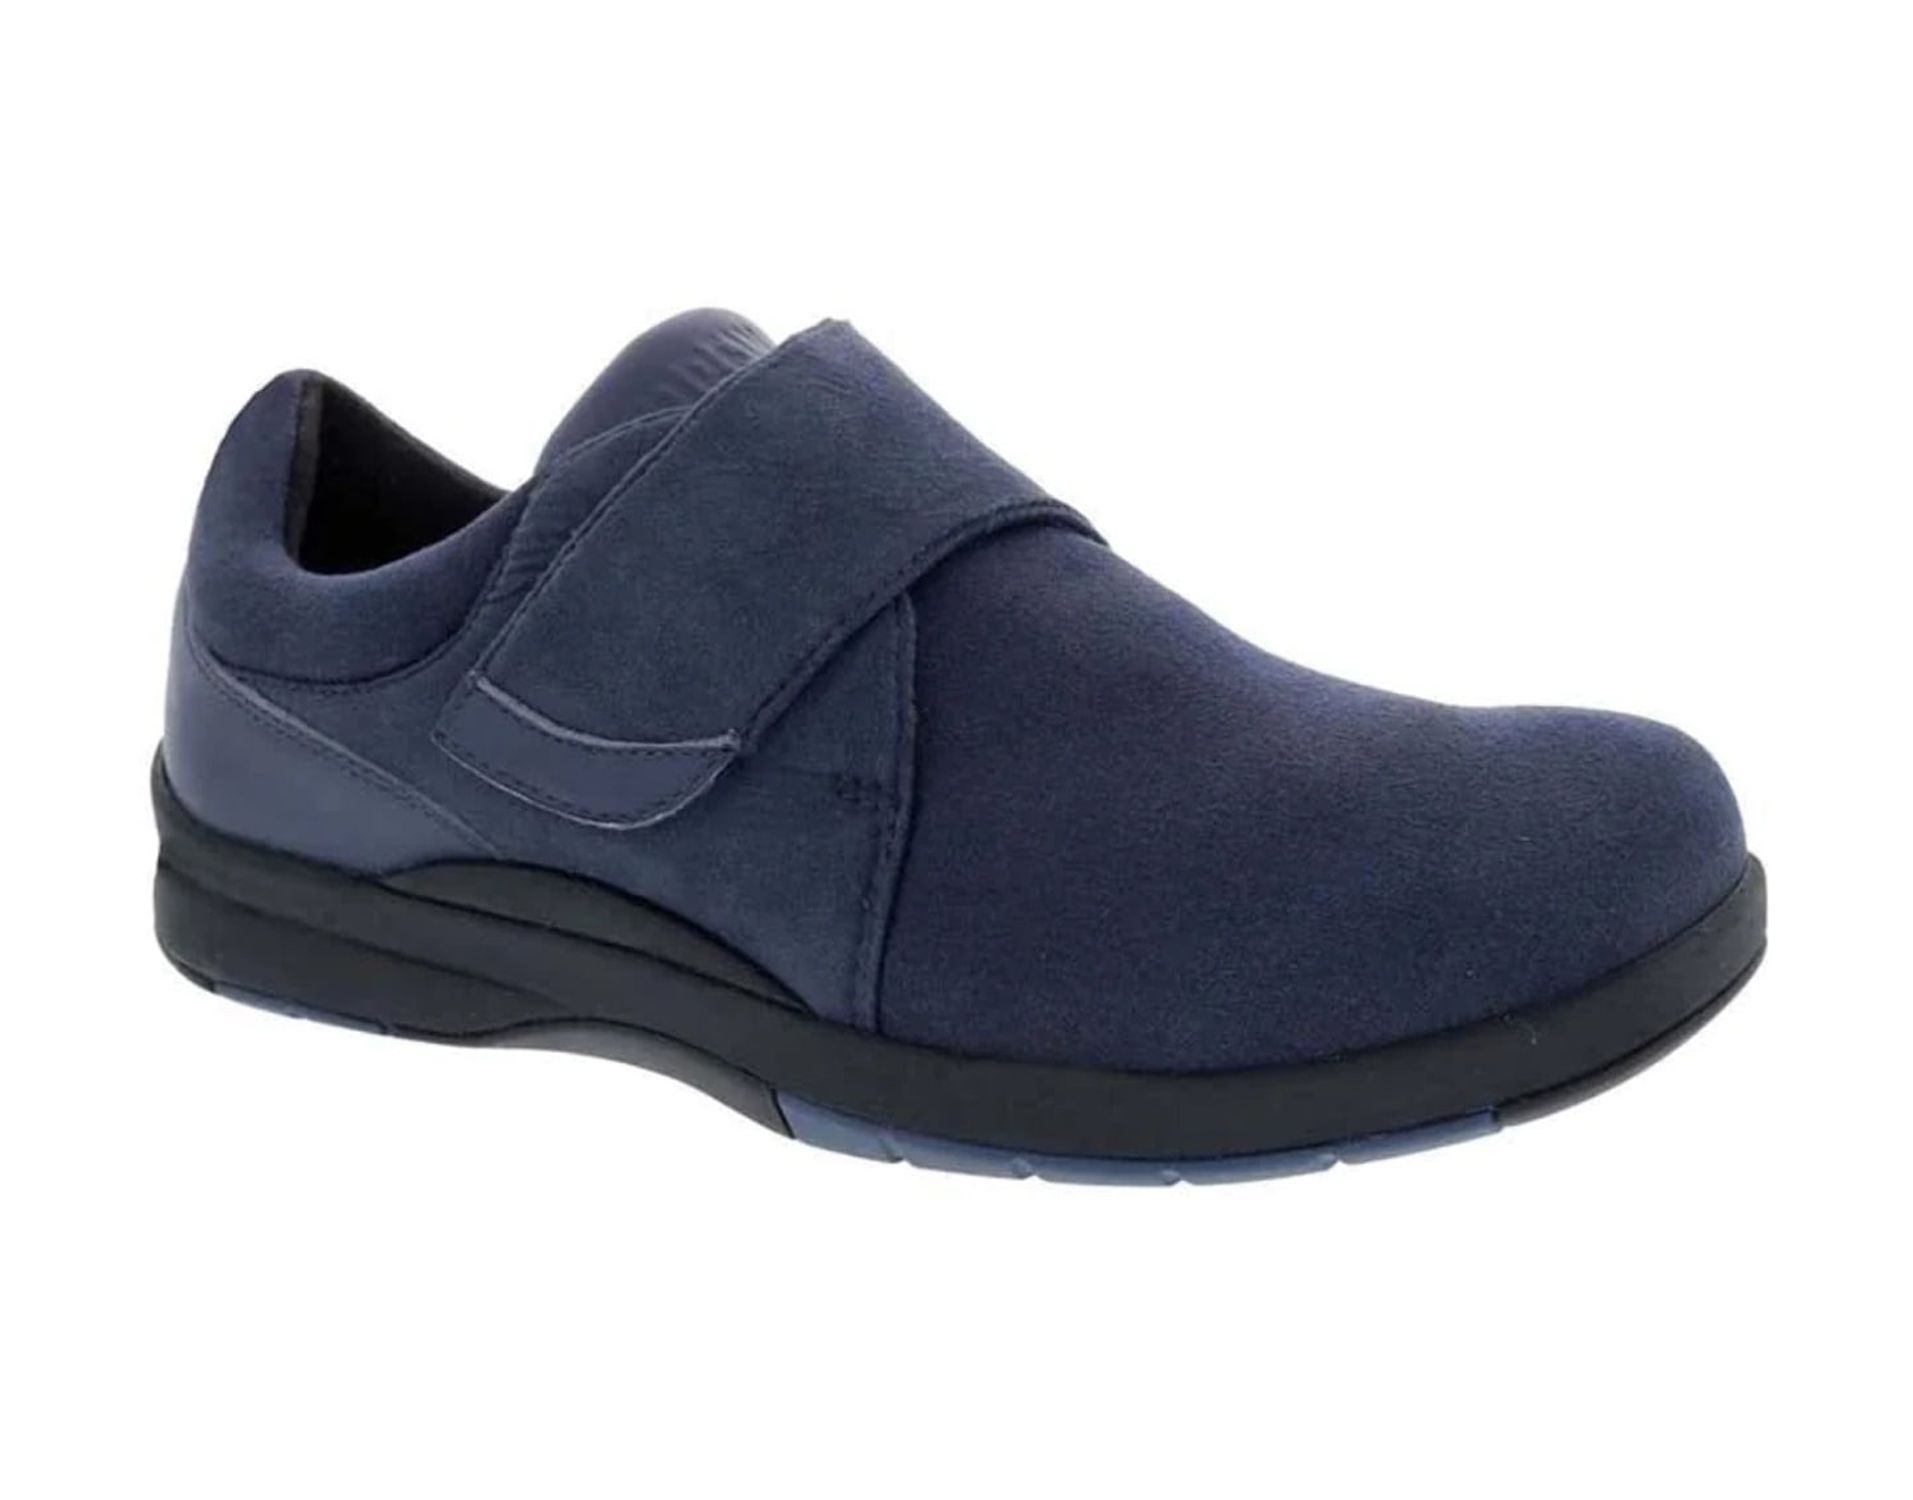 DREW MOONWALK WOMEN CASUAL SHOE IN NAVY STRETCH LEATHER - image 1 of 4